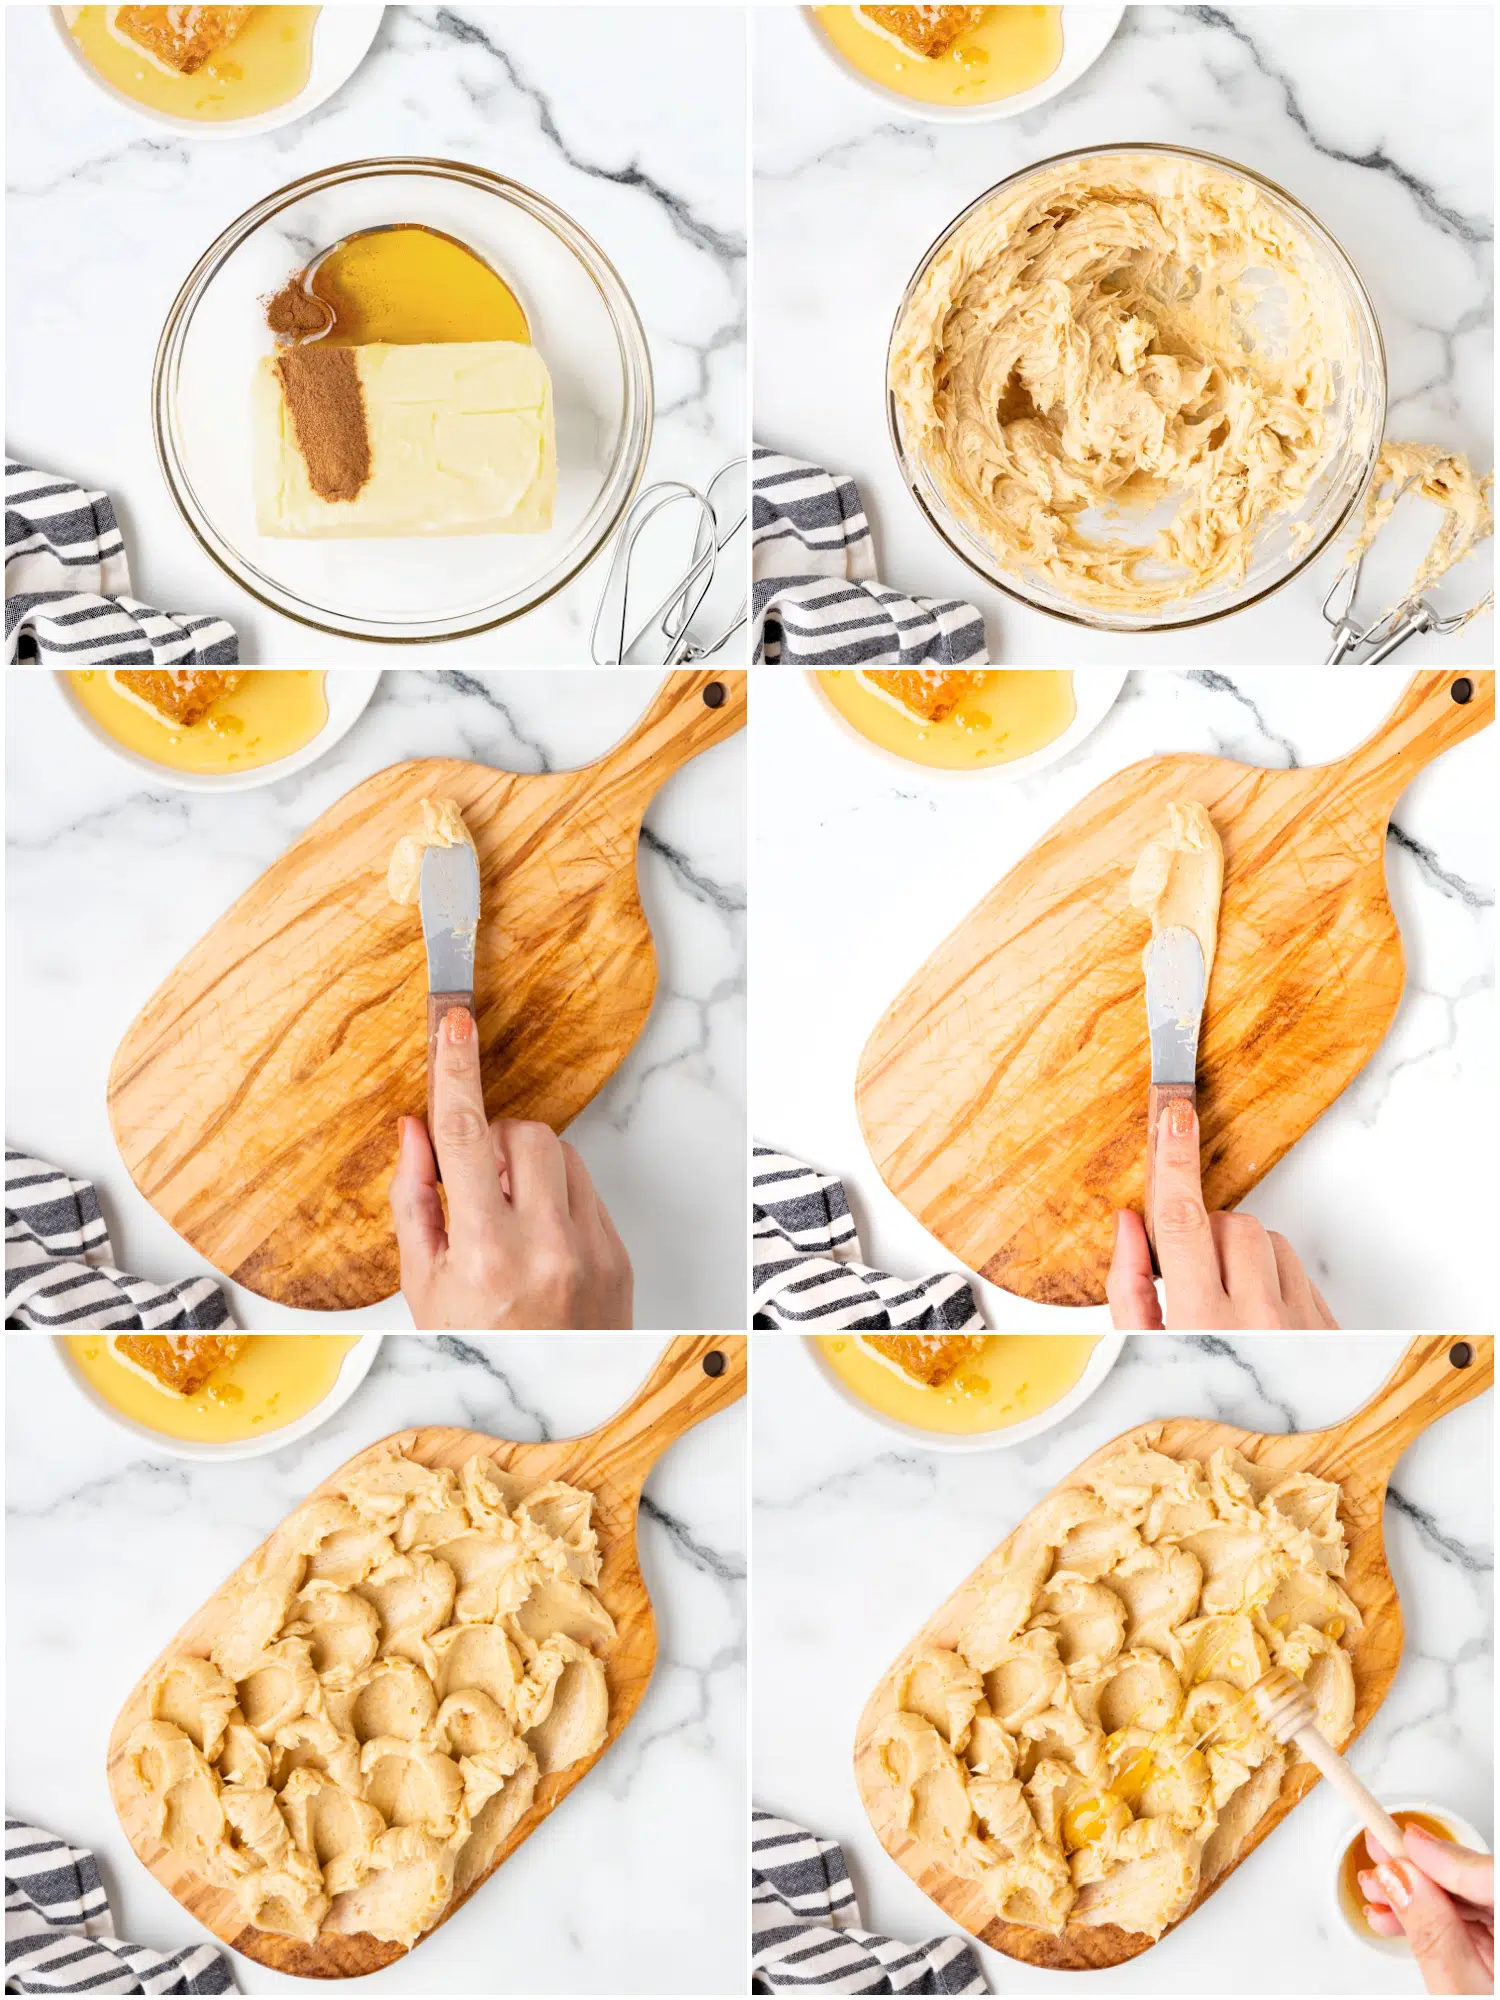 Collage of six images showing the step-by-step process to make a cinnamon honey butter board.